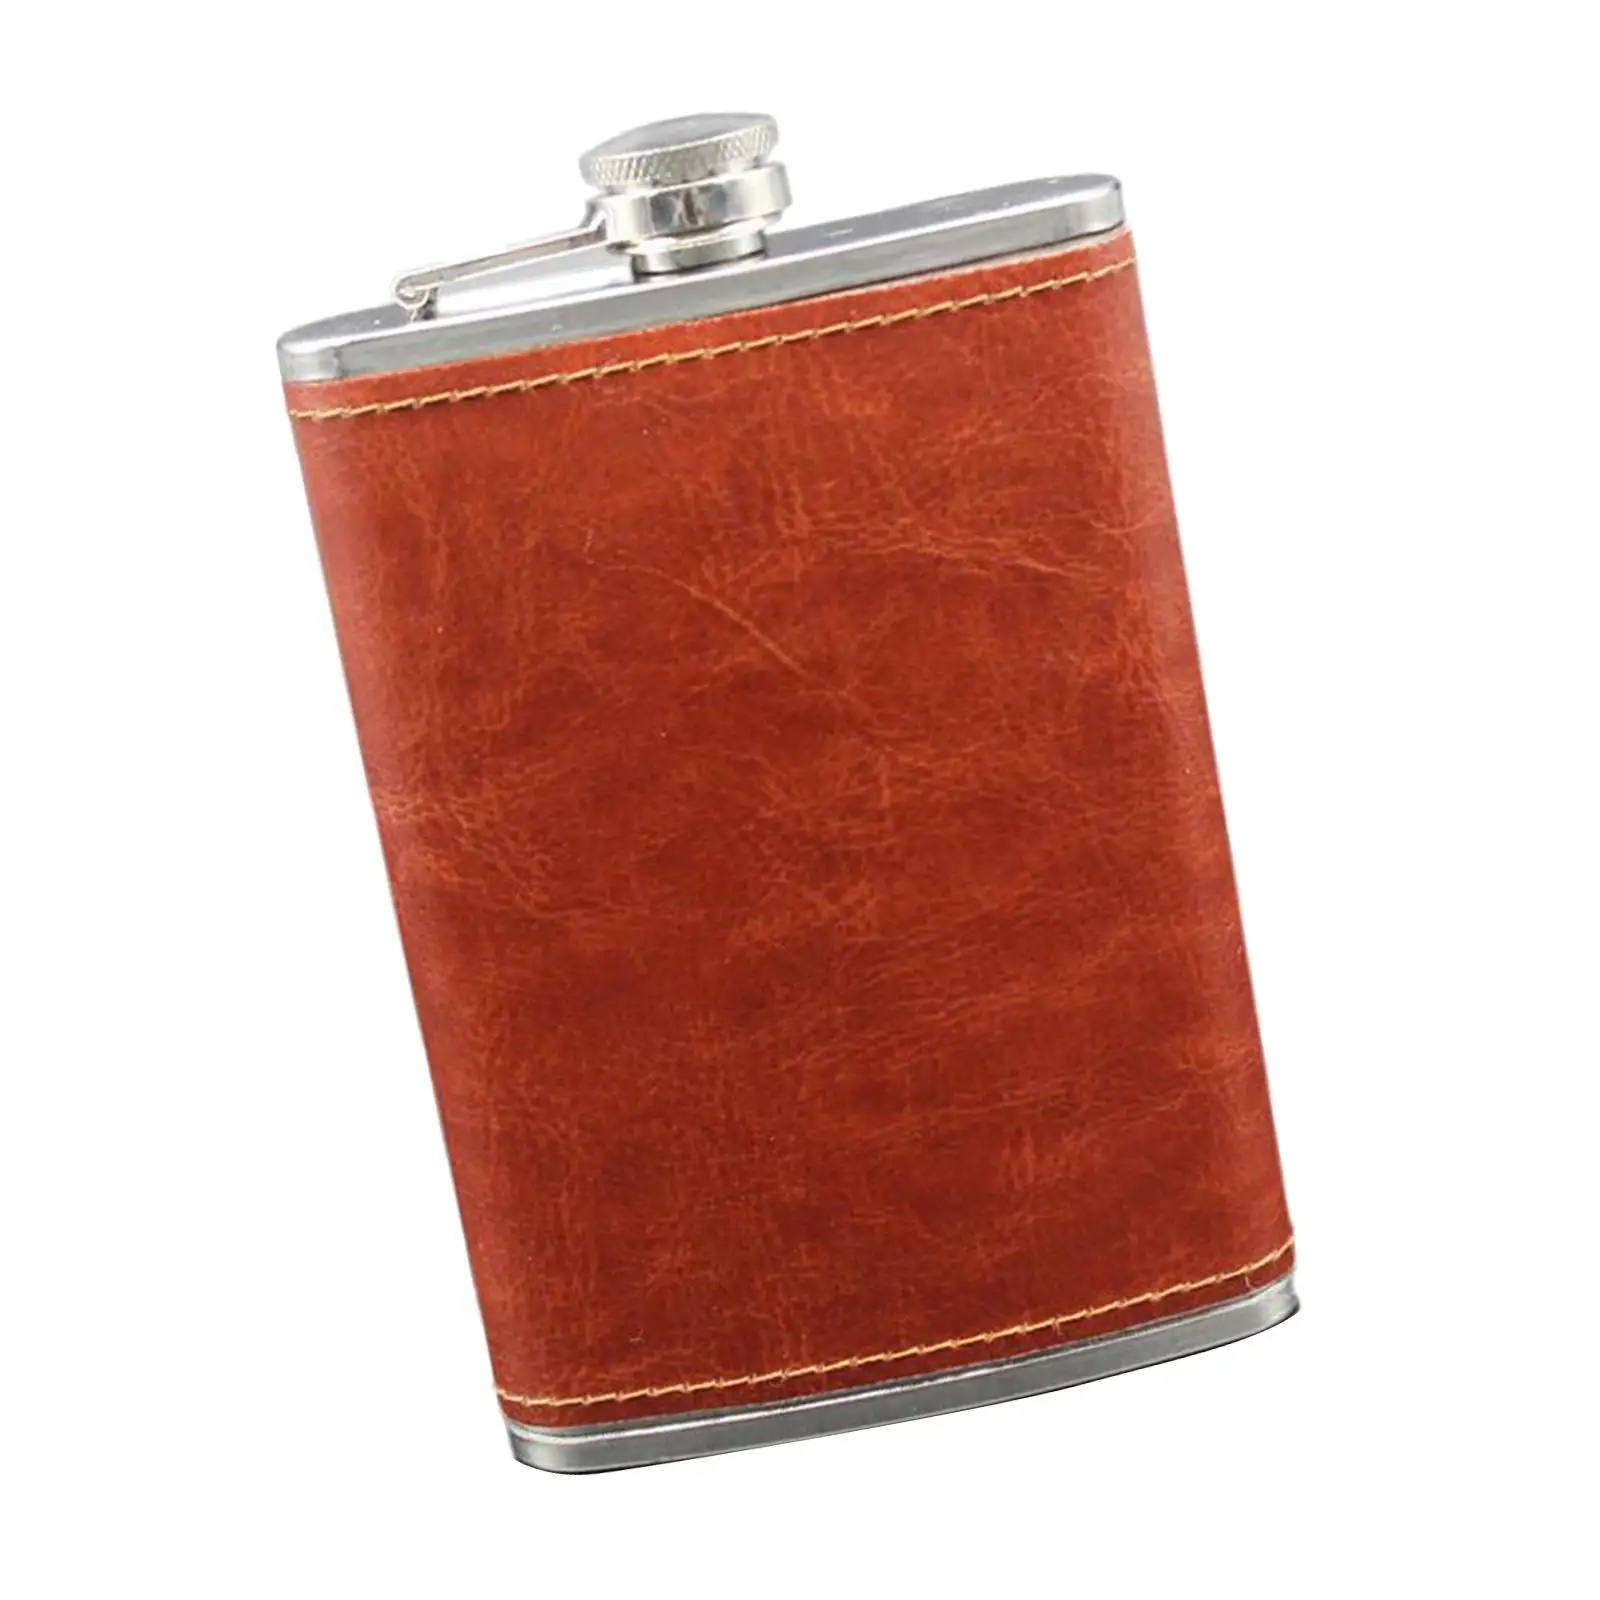 9 oz Hip Flask Leakproof Stainless Steel with PU Leather Wrapped Drinkware for Home Goods Man Gifts Drinker Alcohol 301-400ml